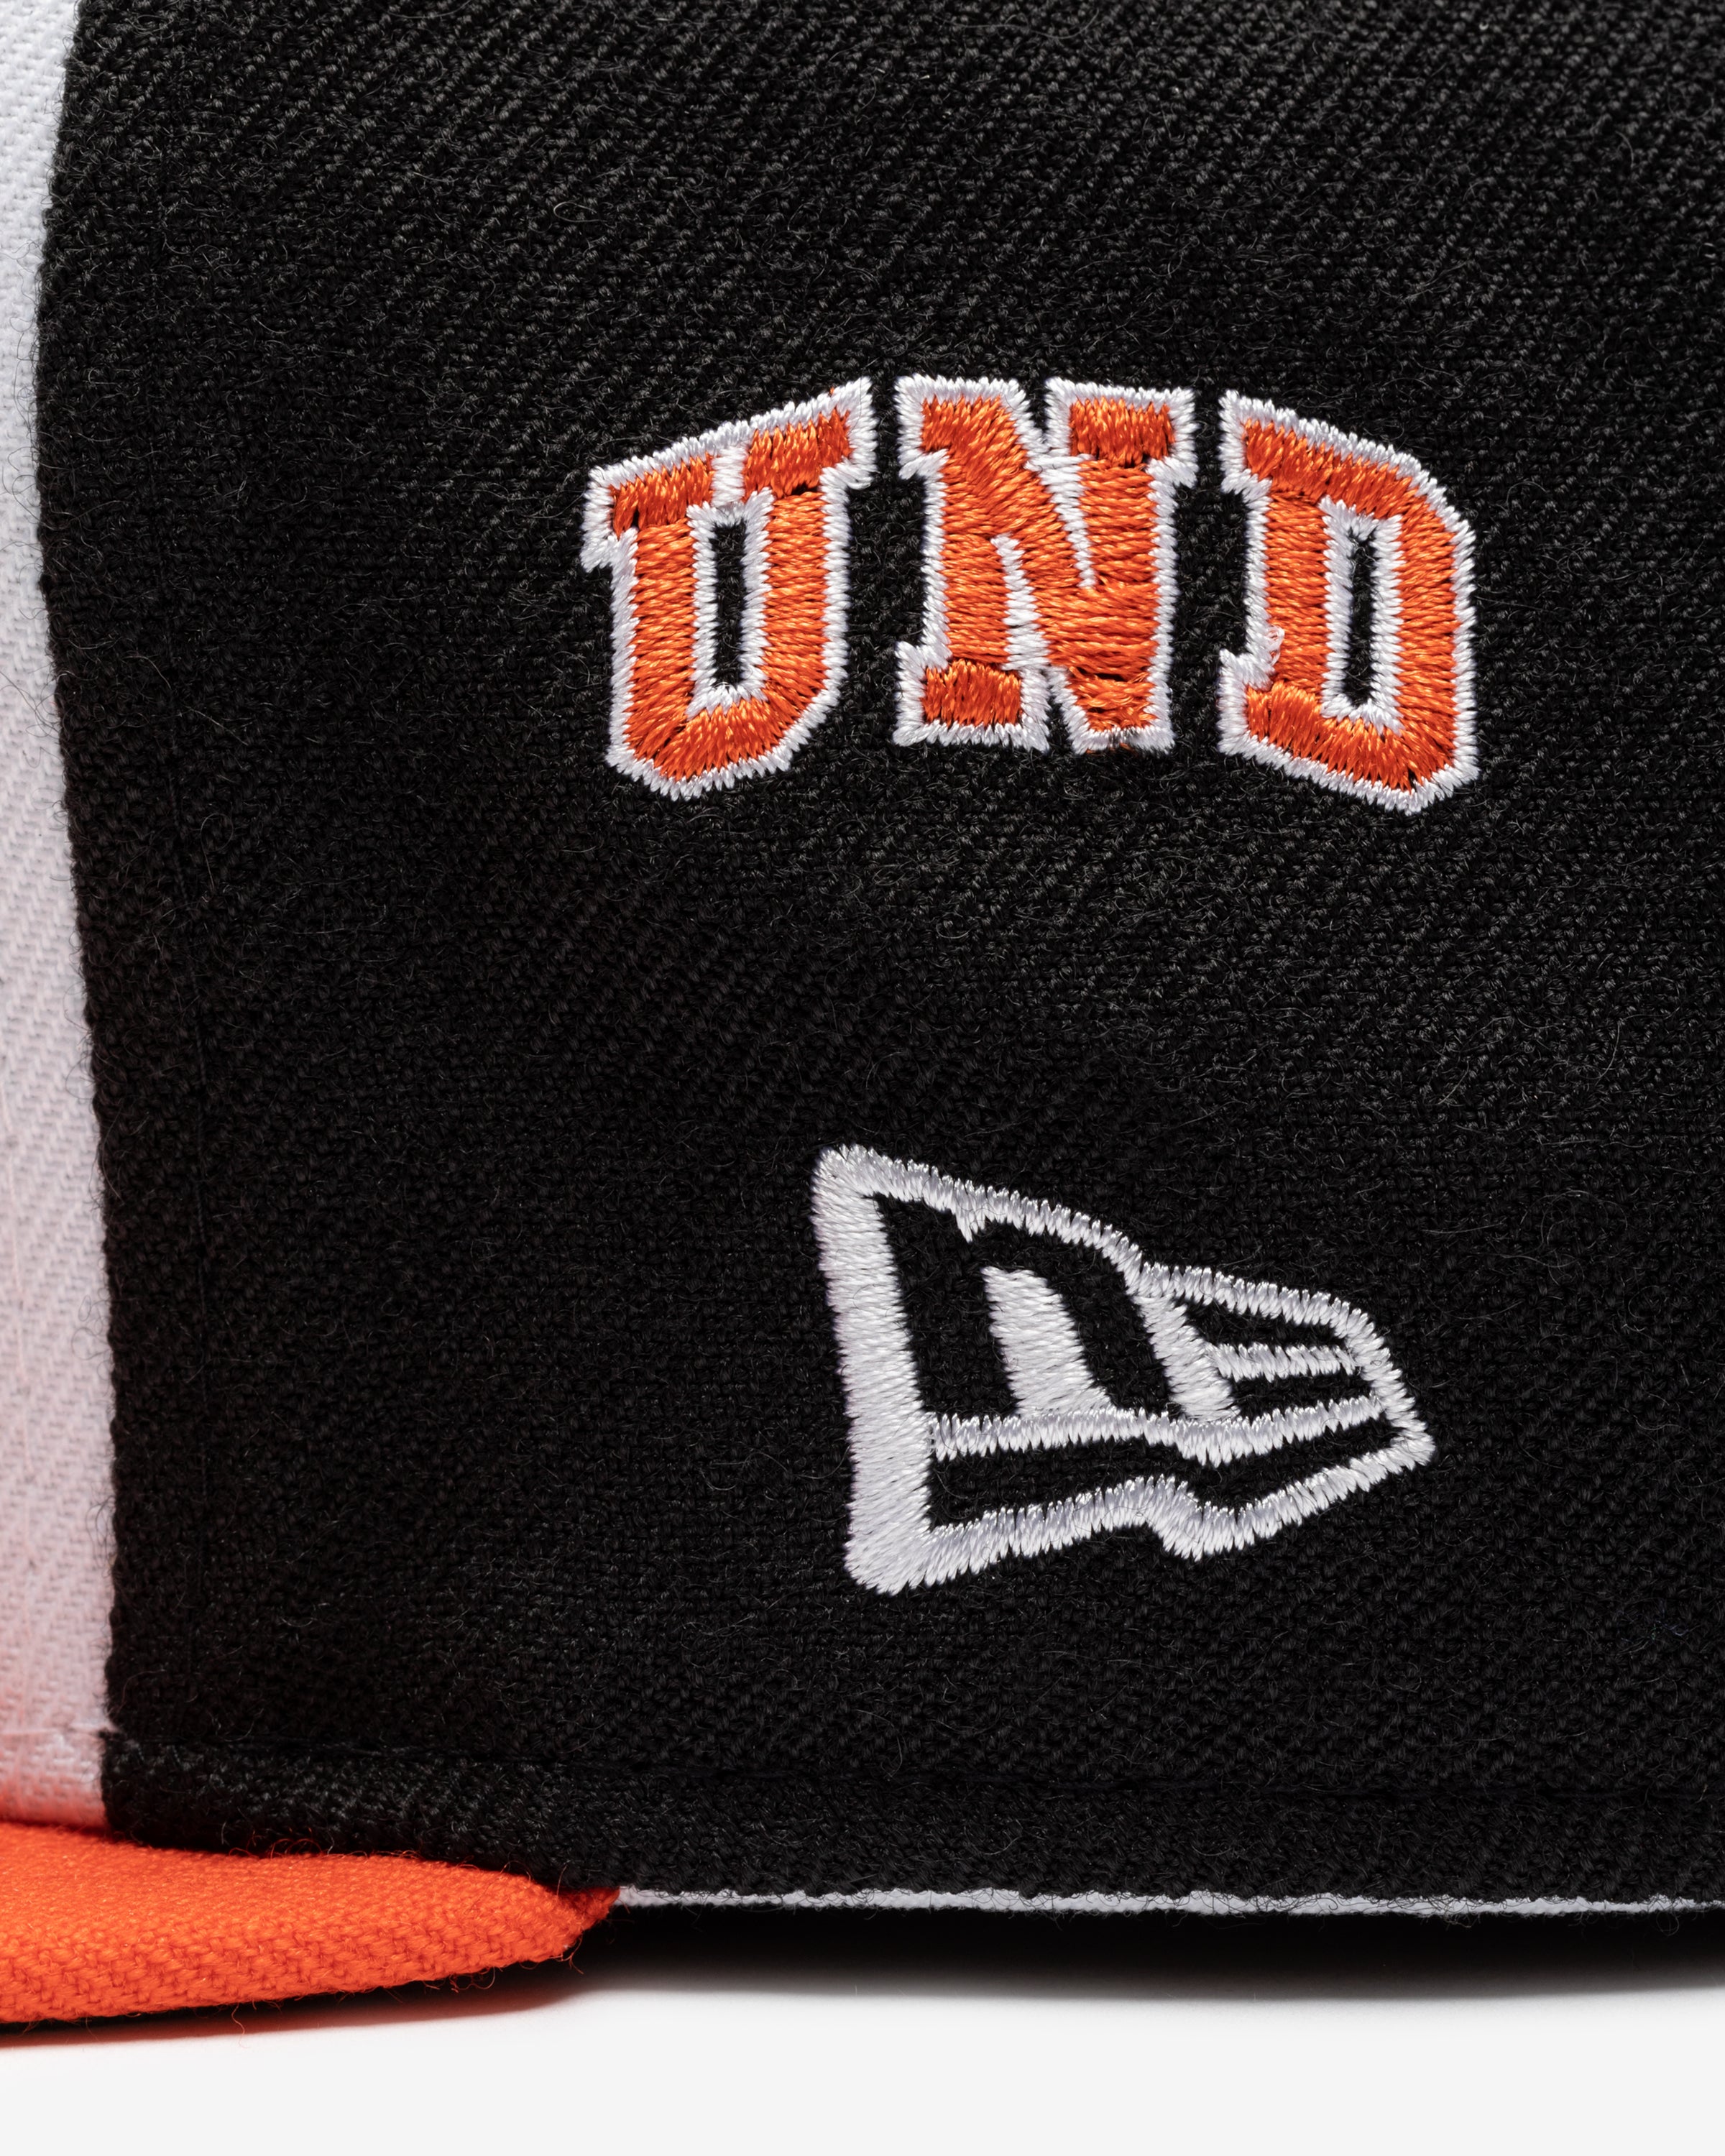 UNDEFEATED X NE X MLB FITTED - BALTIMORE ORIOLES